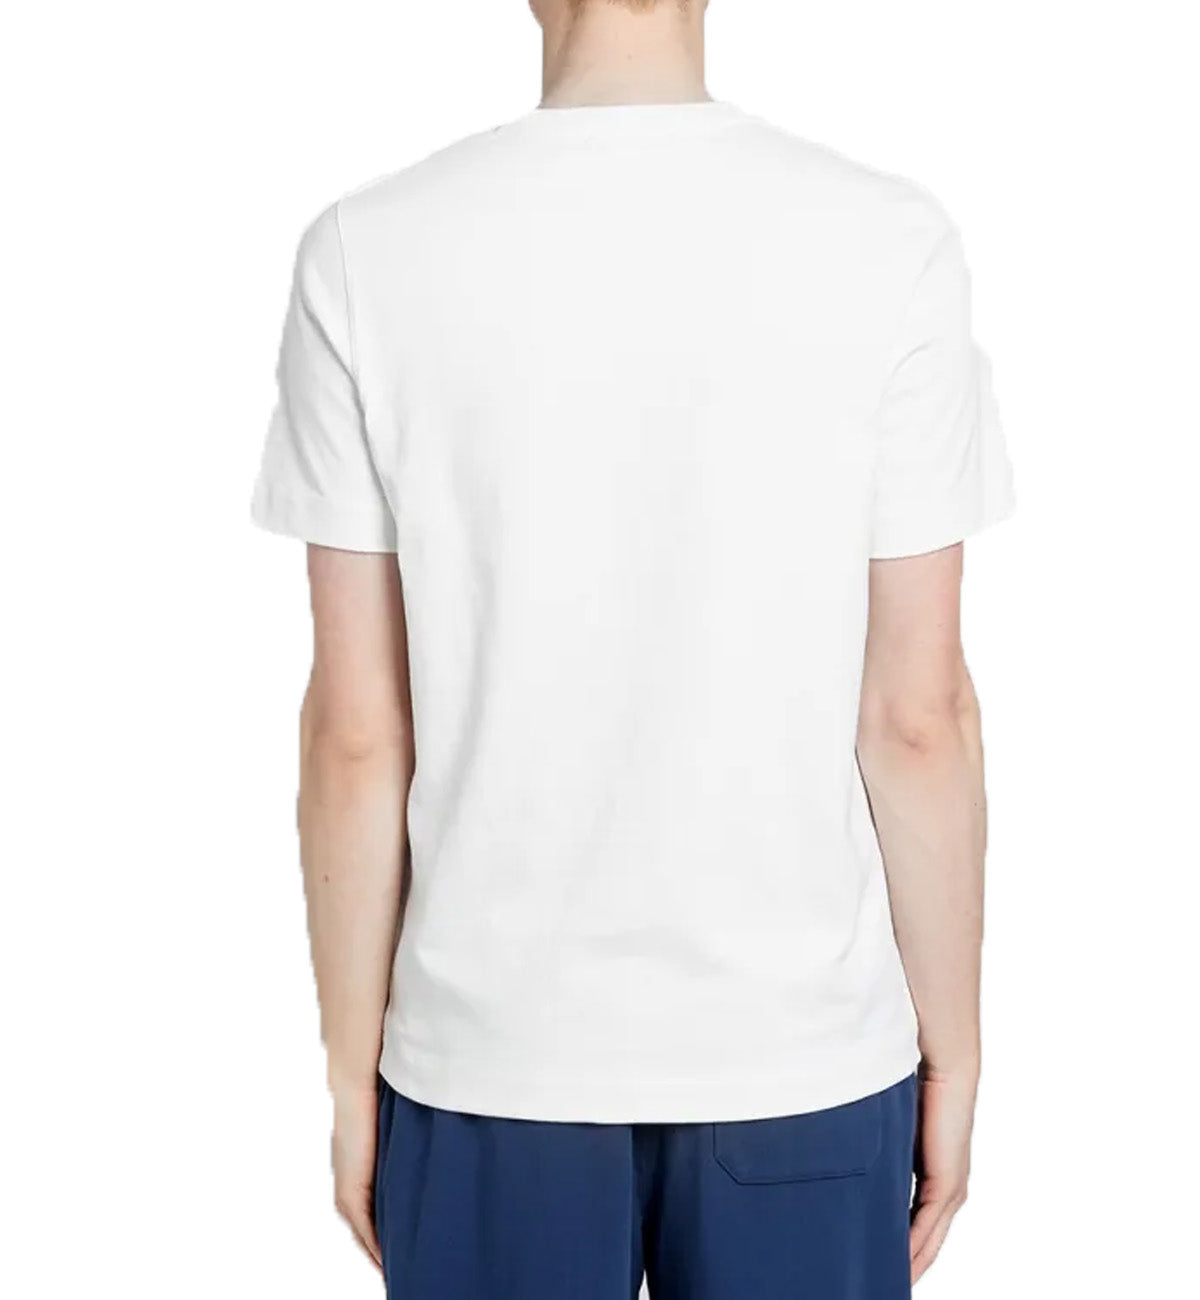 Fred Perry Archive Branded T-Shirt (White)